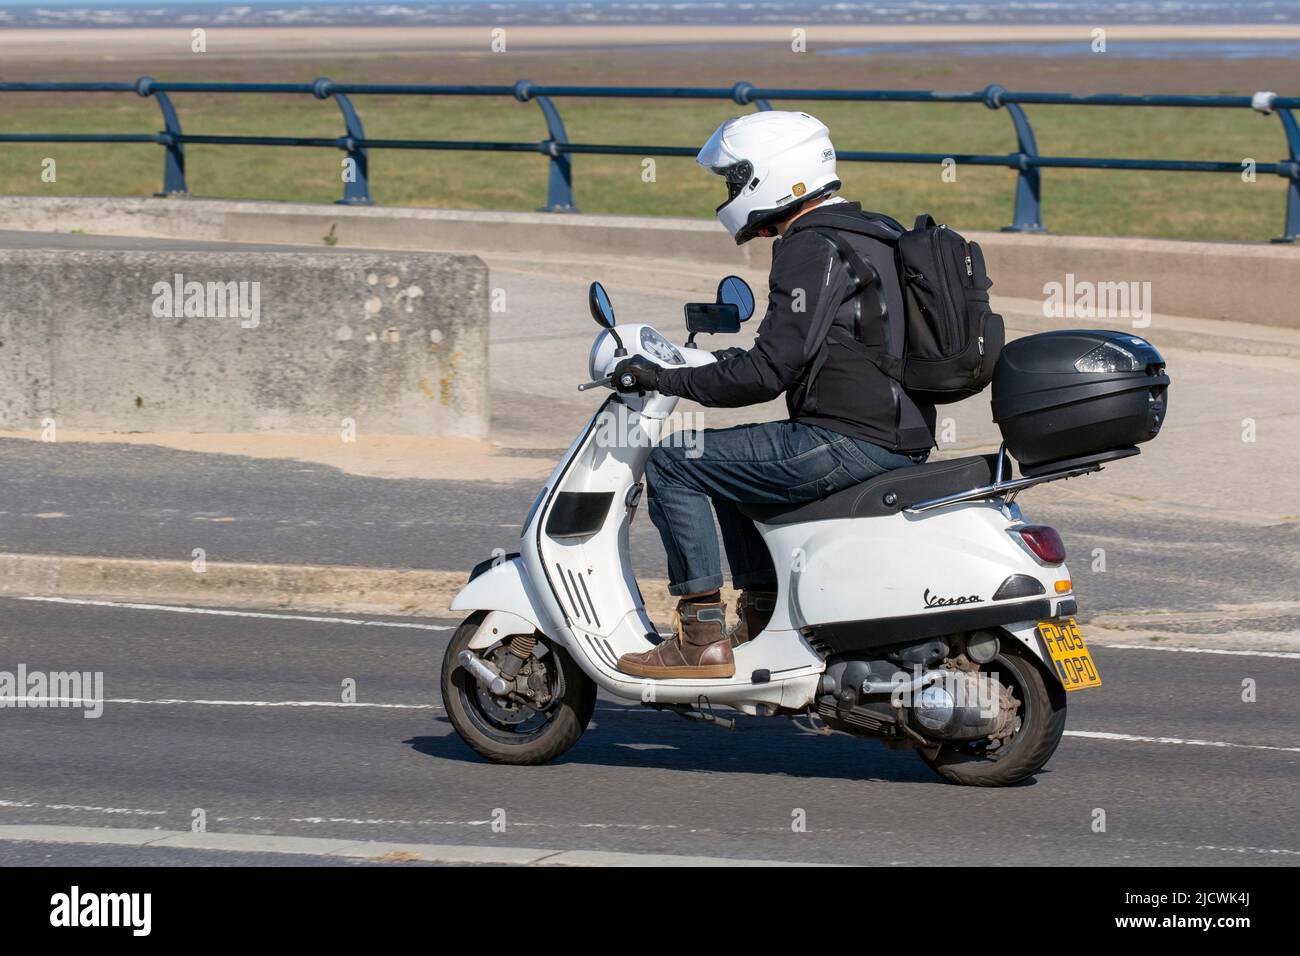 2005 white Piaggio Vespa Scooter dirivng on the seafroint promenade in Southport, UK Stock Photo